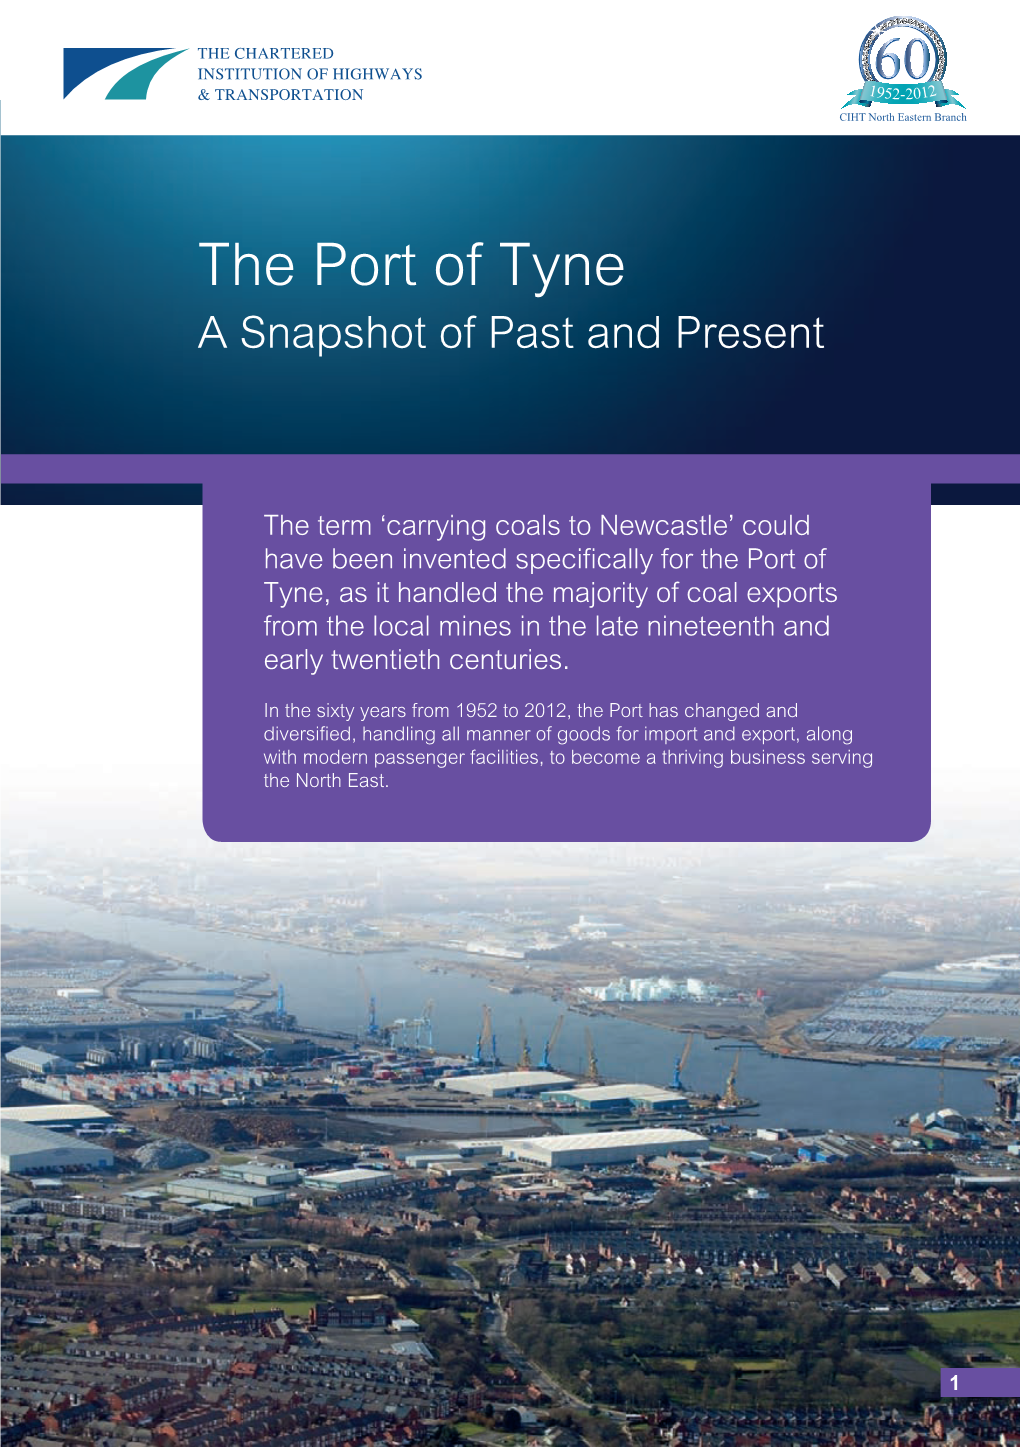 The Port of Tyne Past and Present